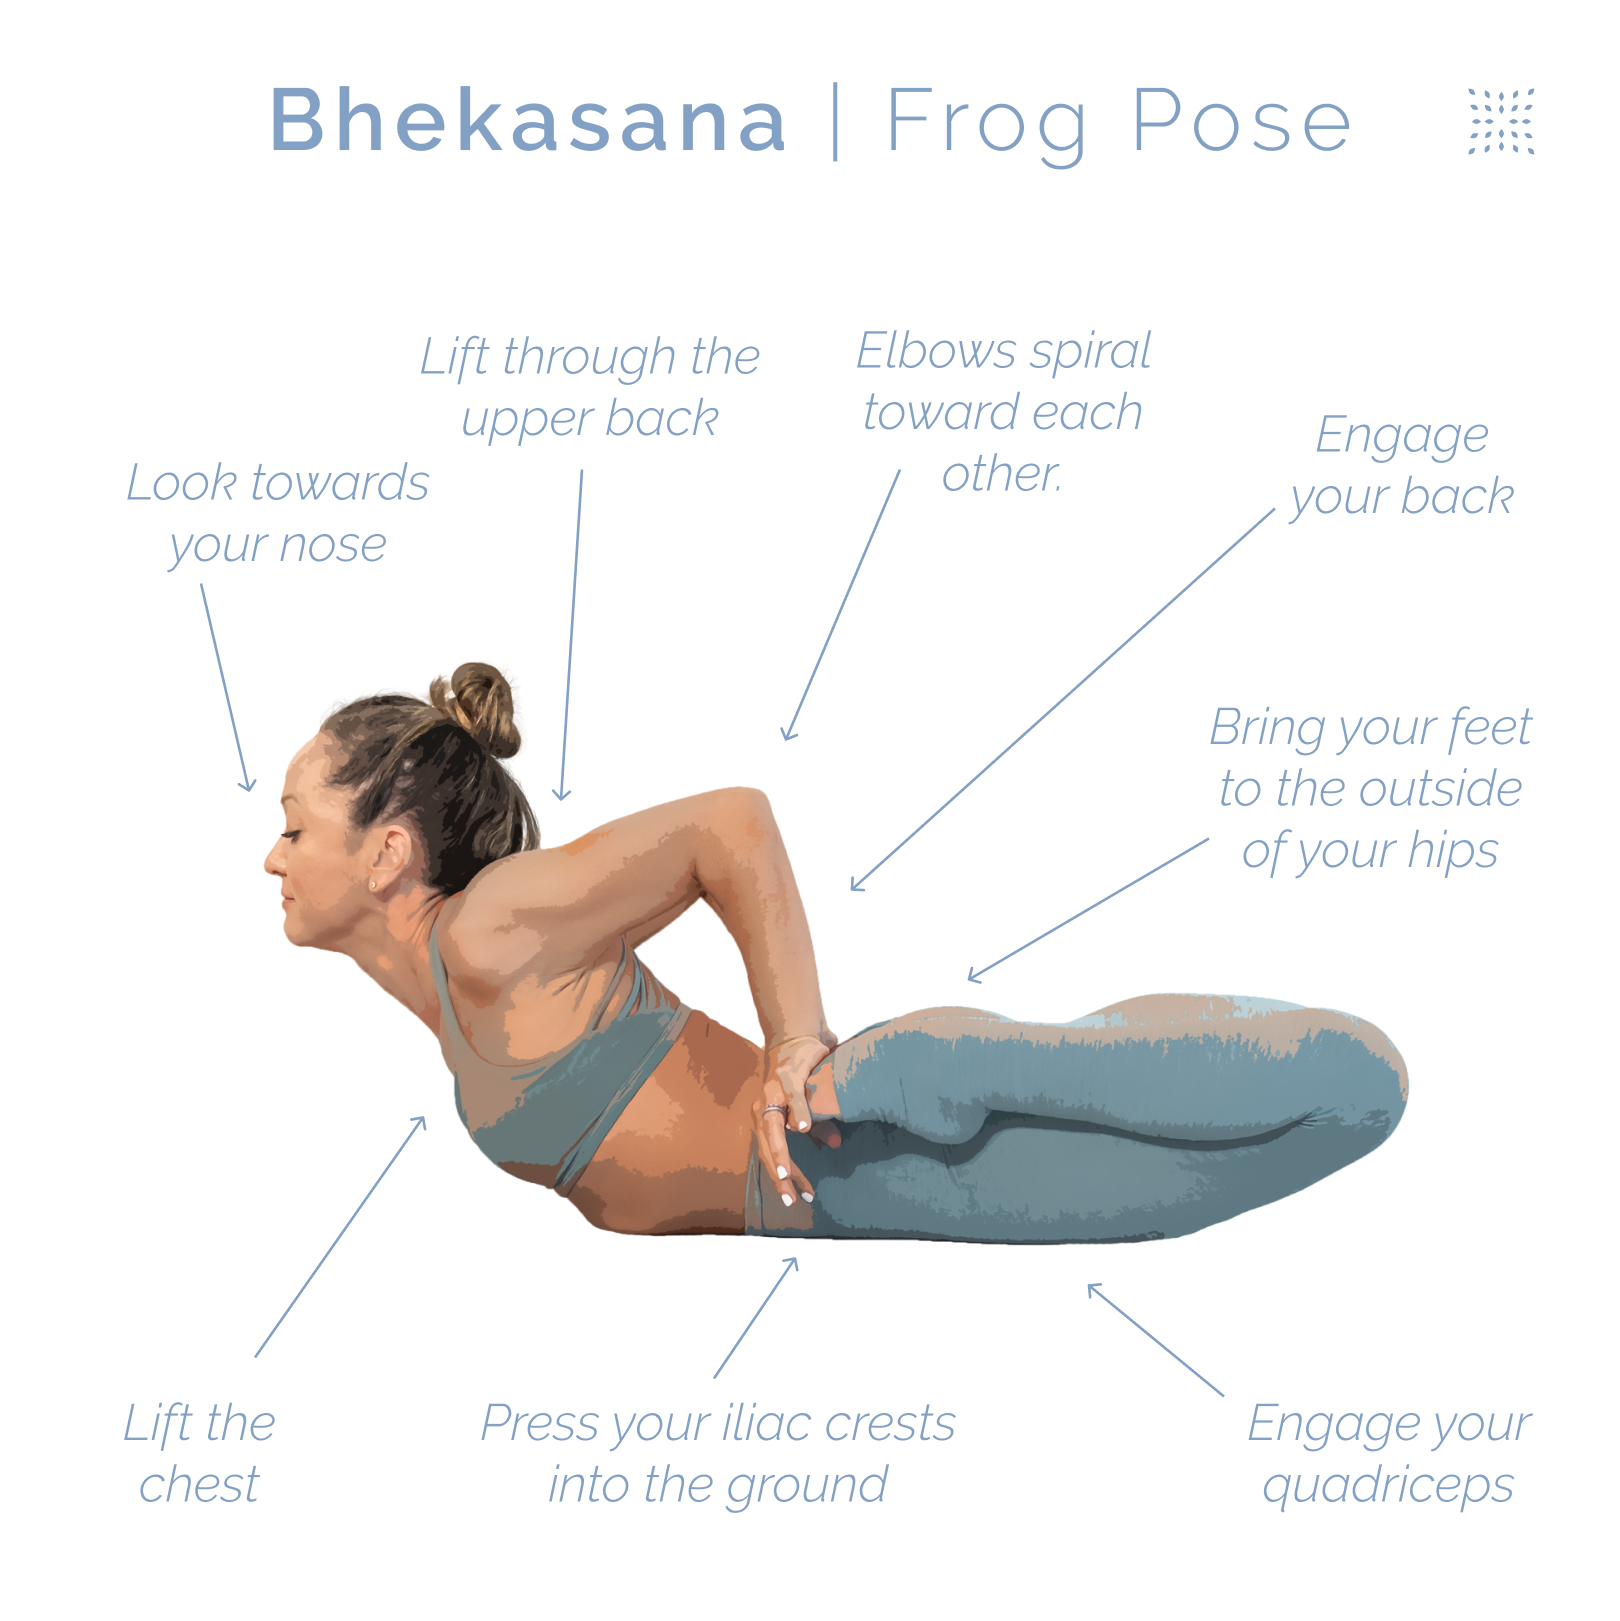 Practicing Frog Pose Safely and Effectively